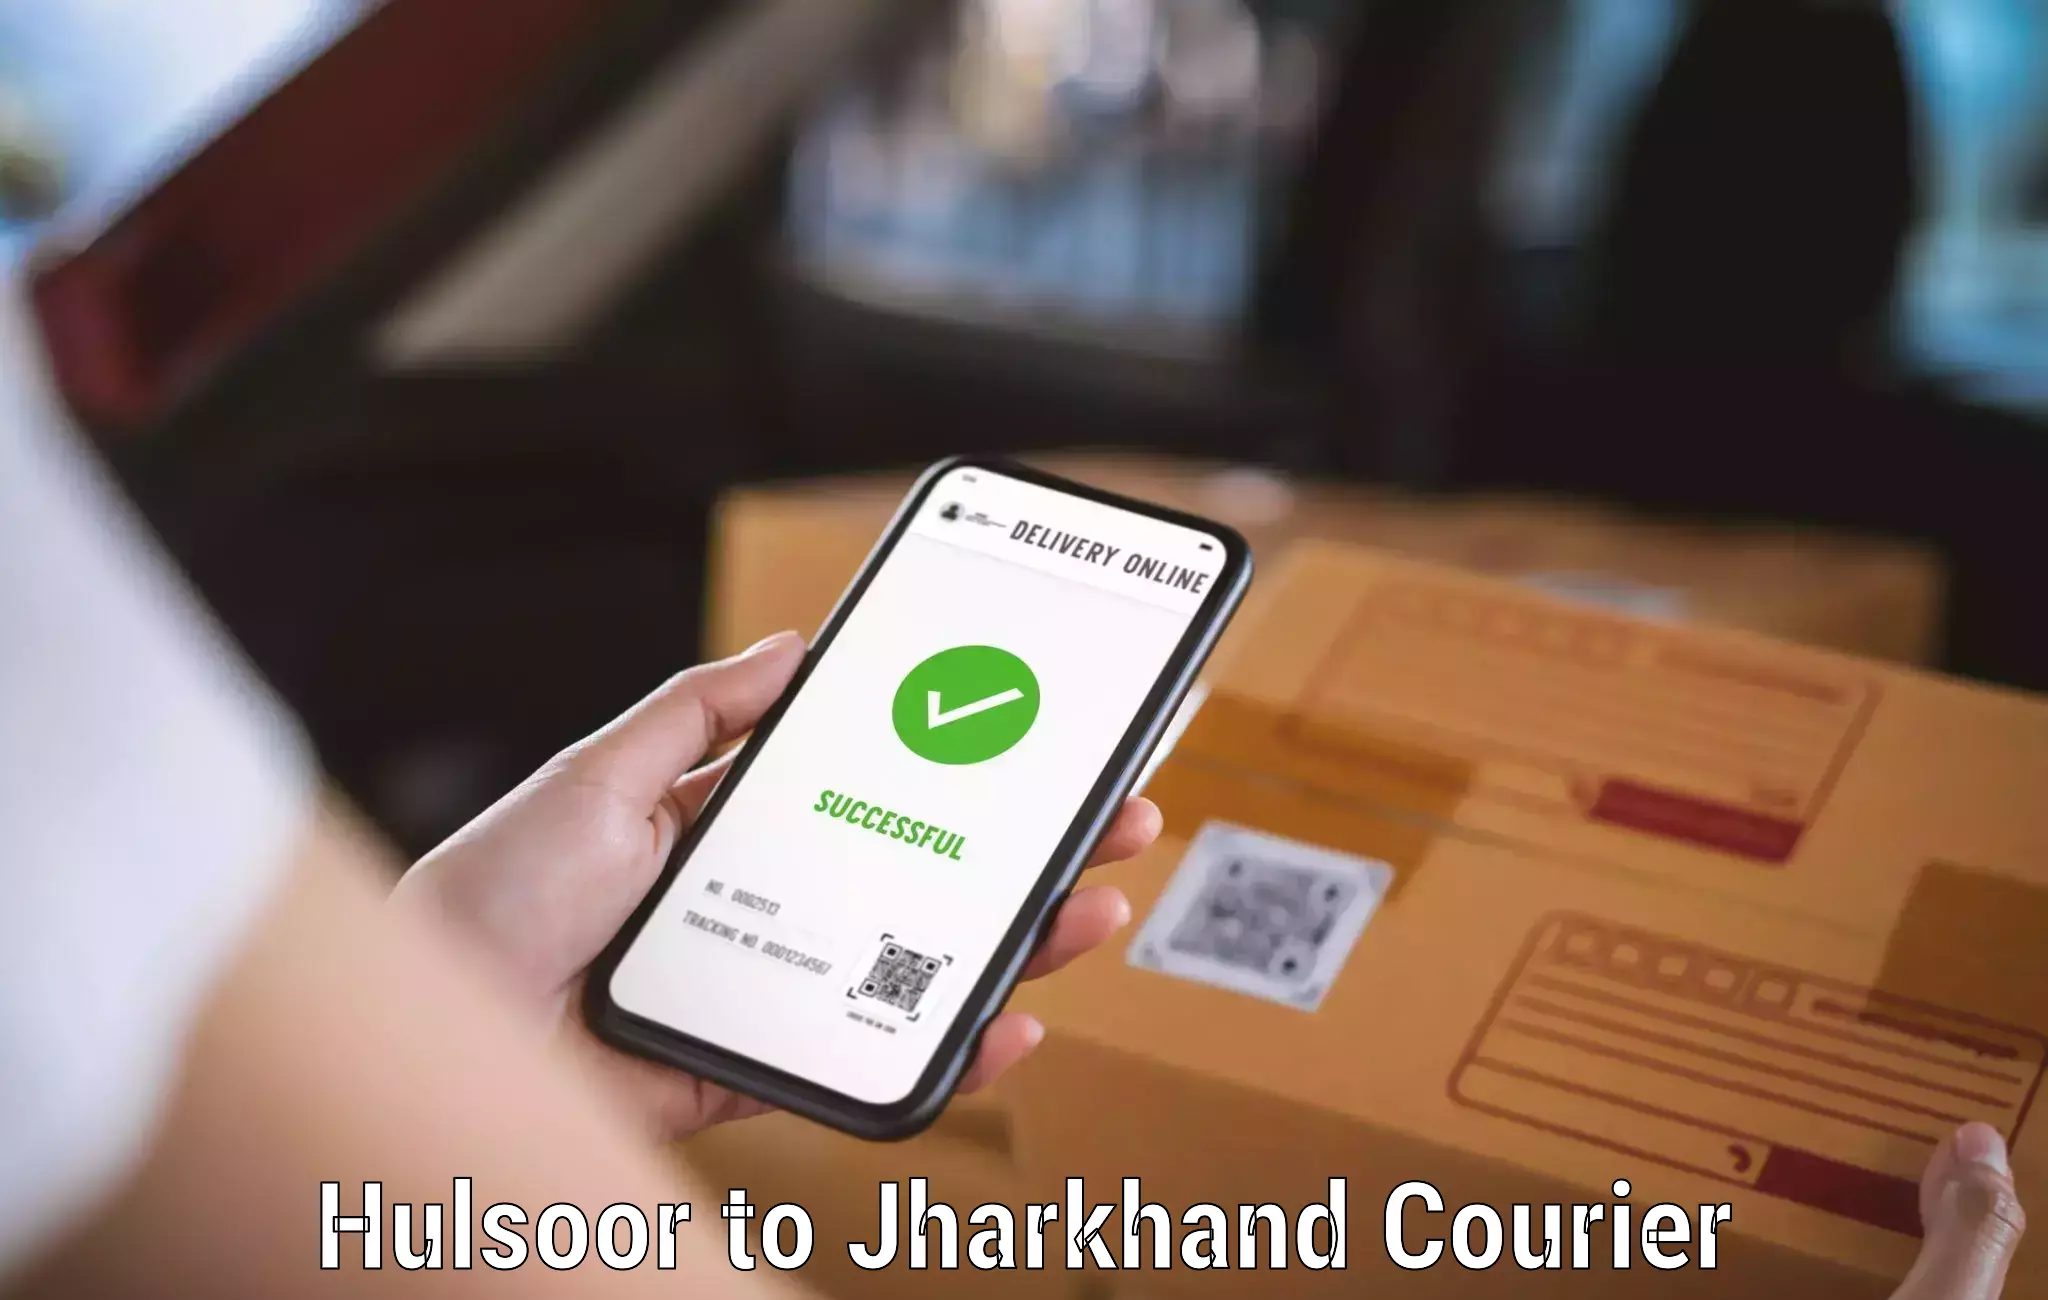 Reliable courier service Hulsoor to Jamshedpur